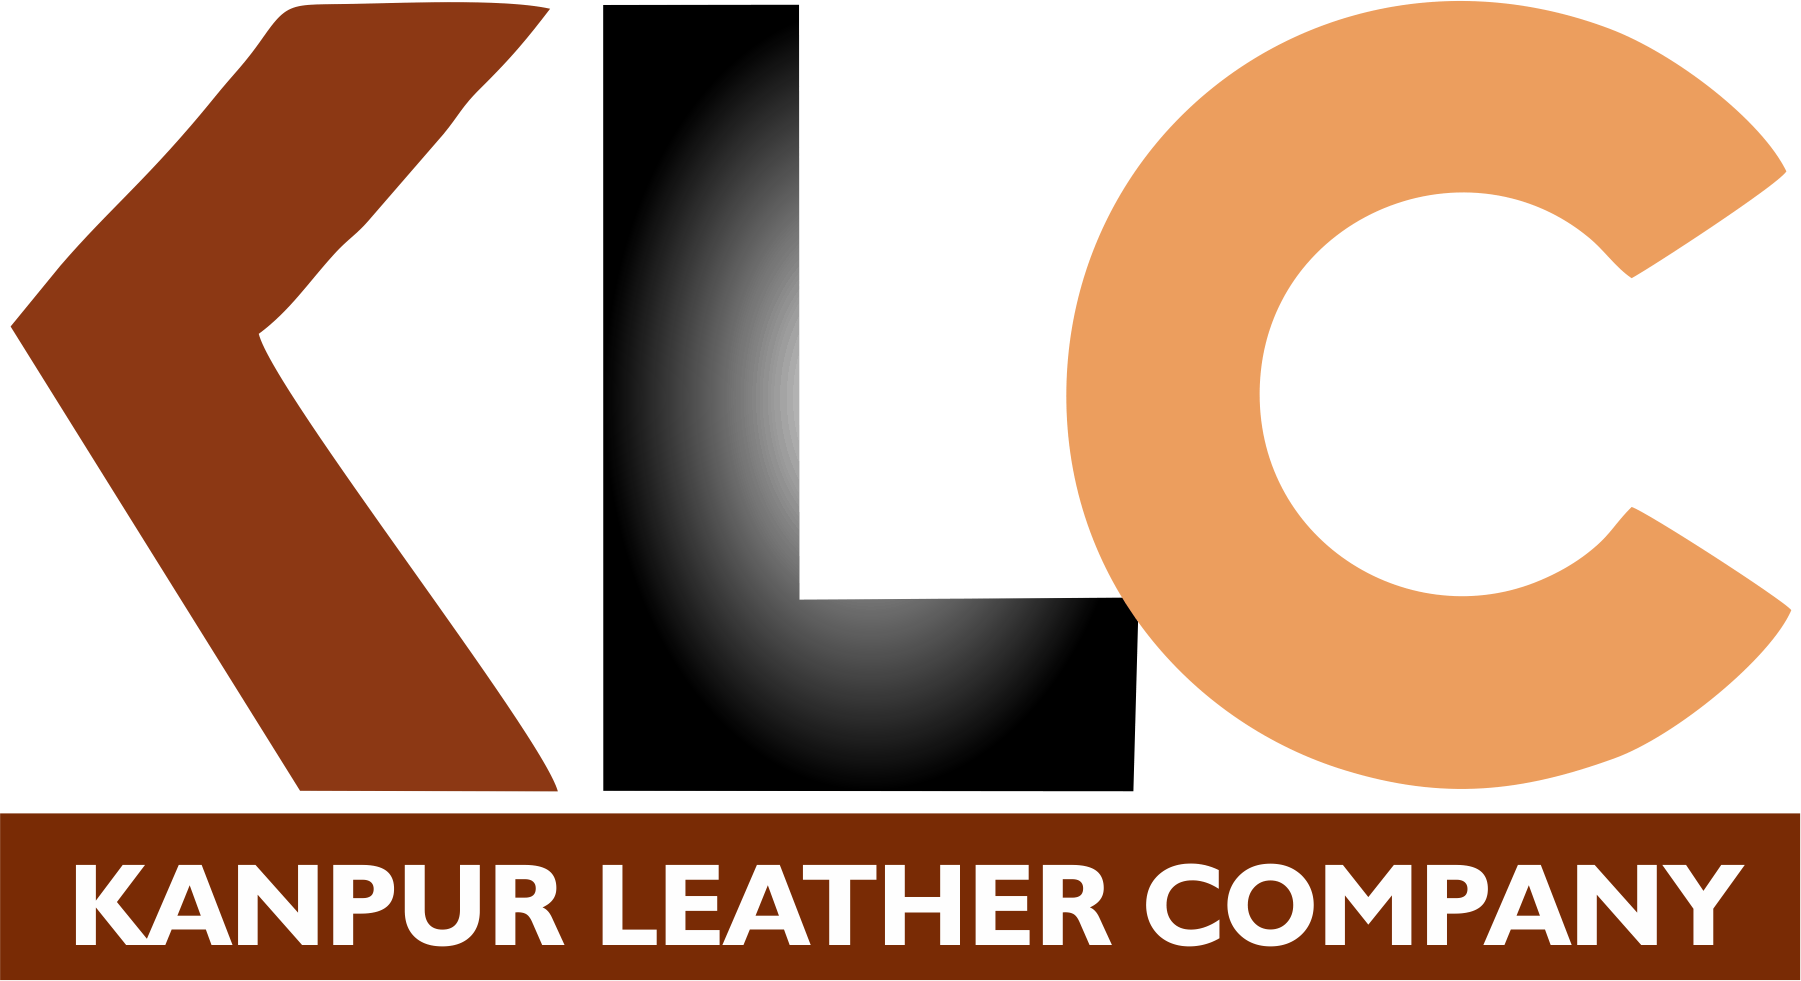 KANPUR LEATHER Handicraft producer company limited